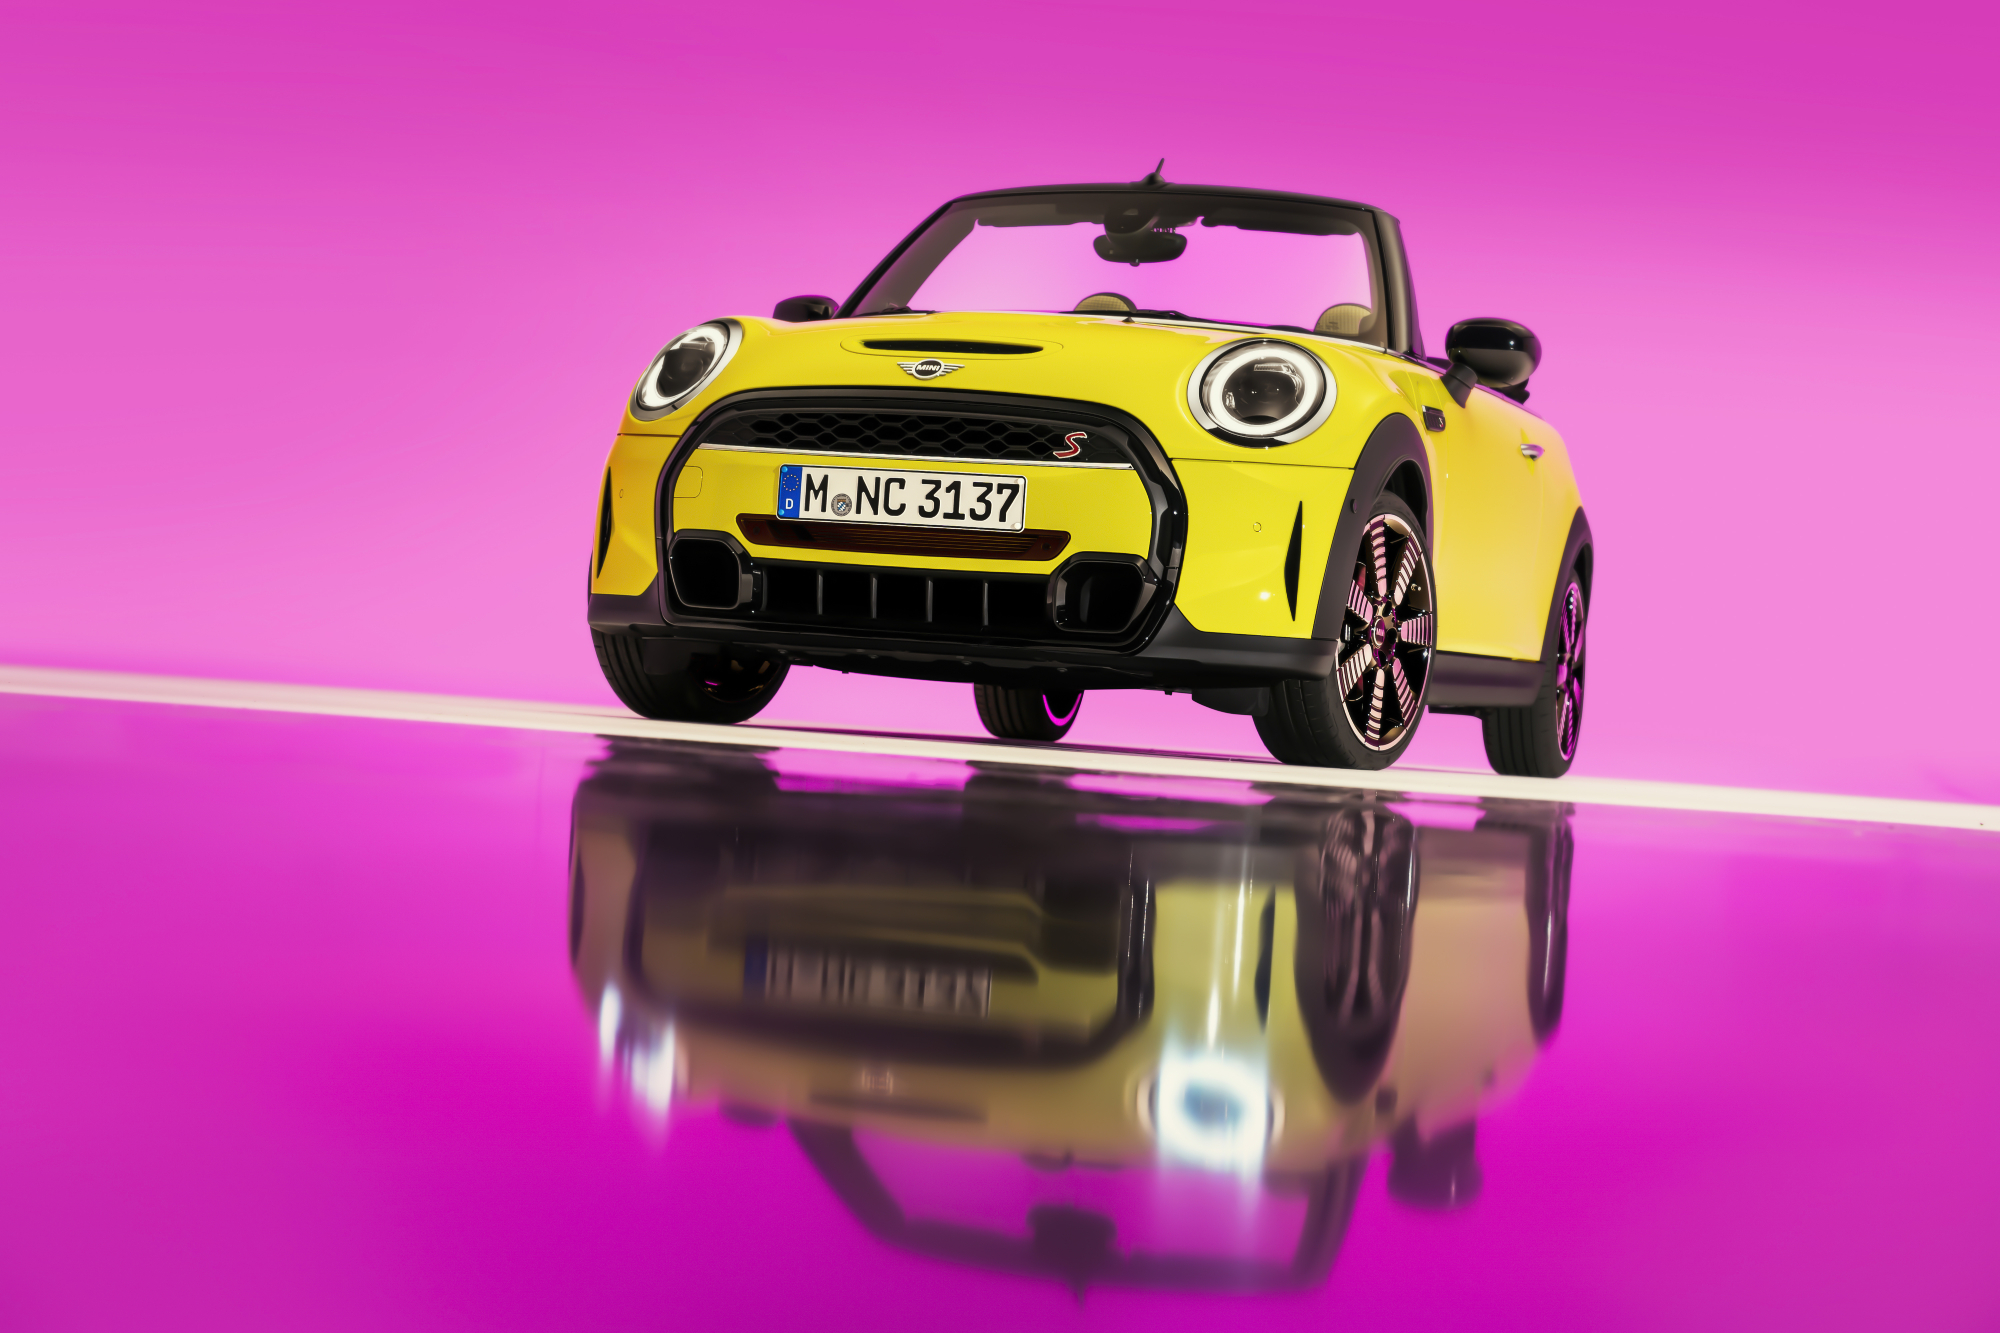 A yellow 2022 Mini Cooper S Convertible on display with a pink background